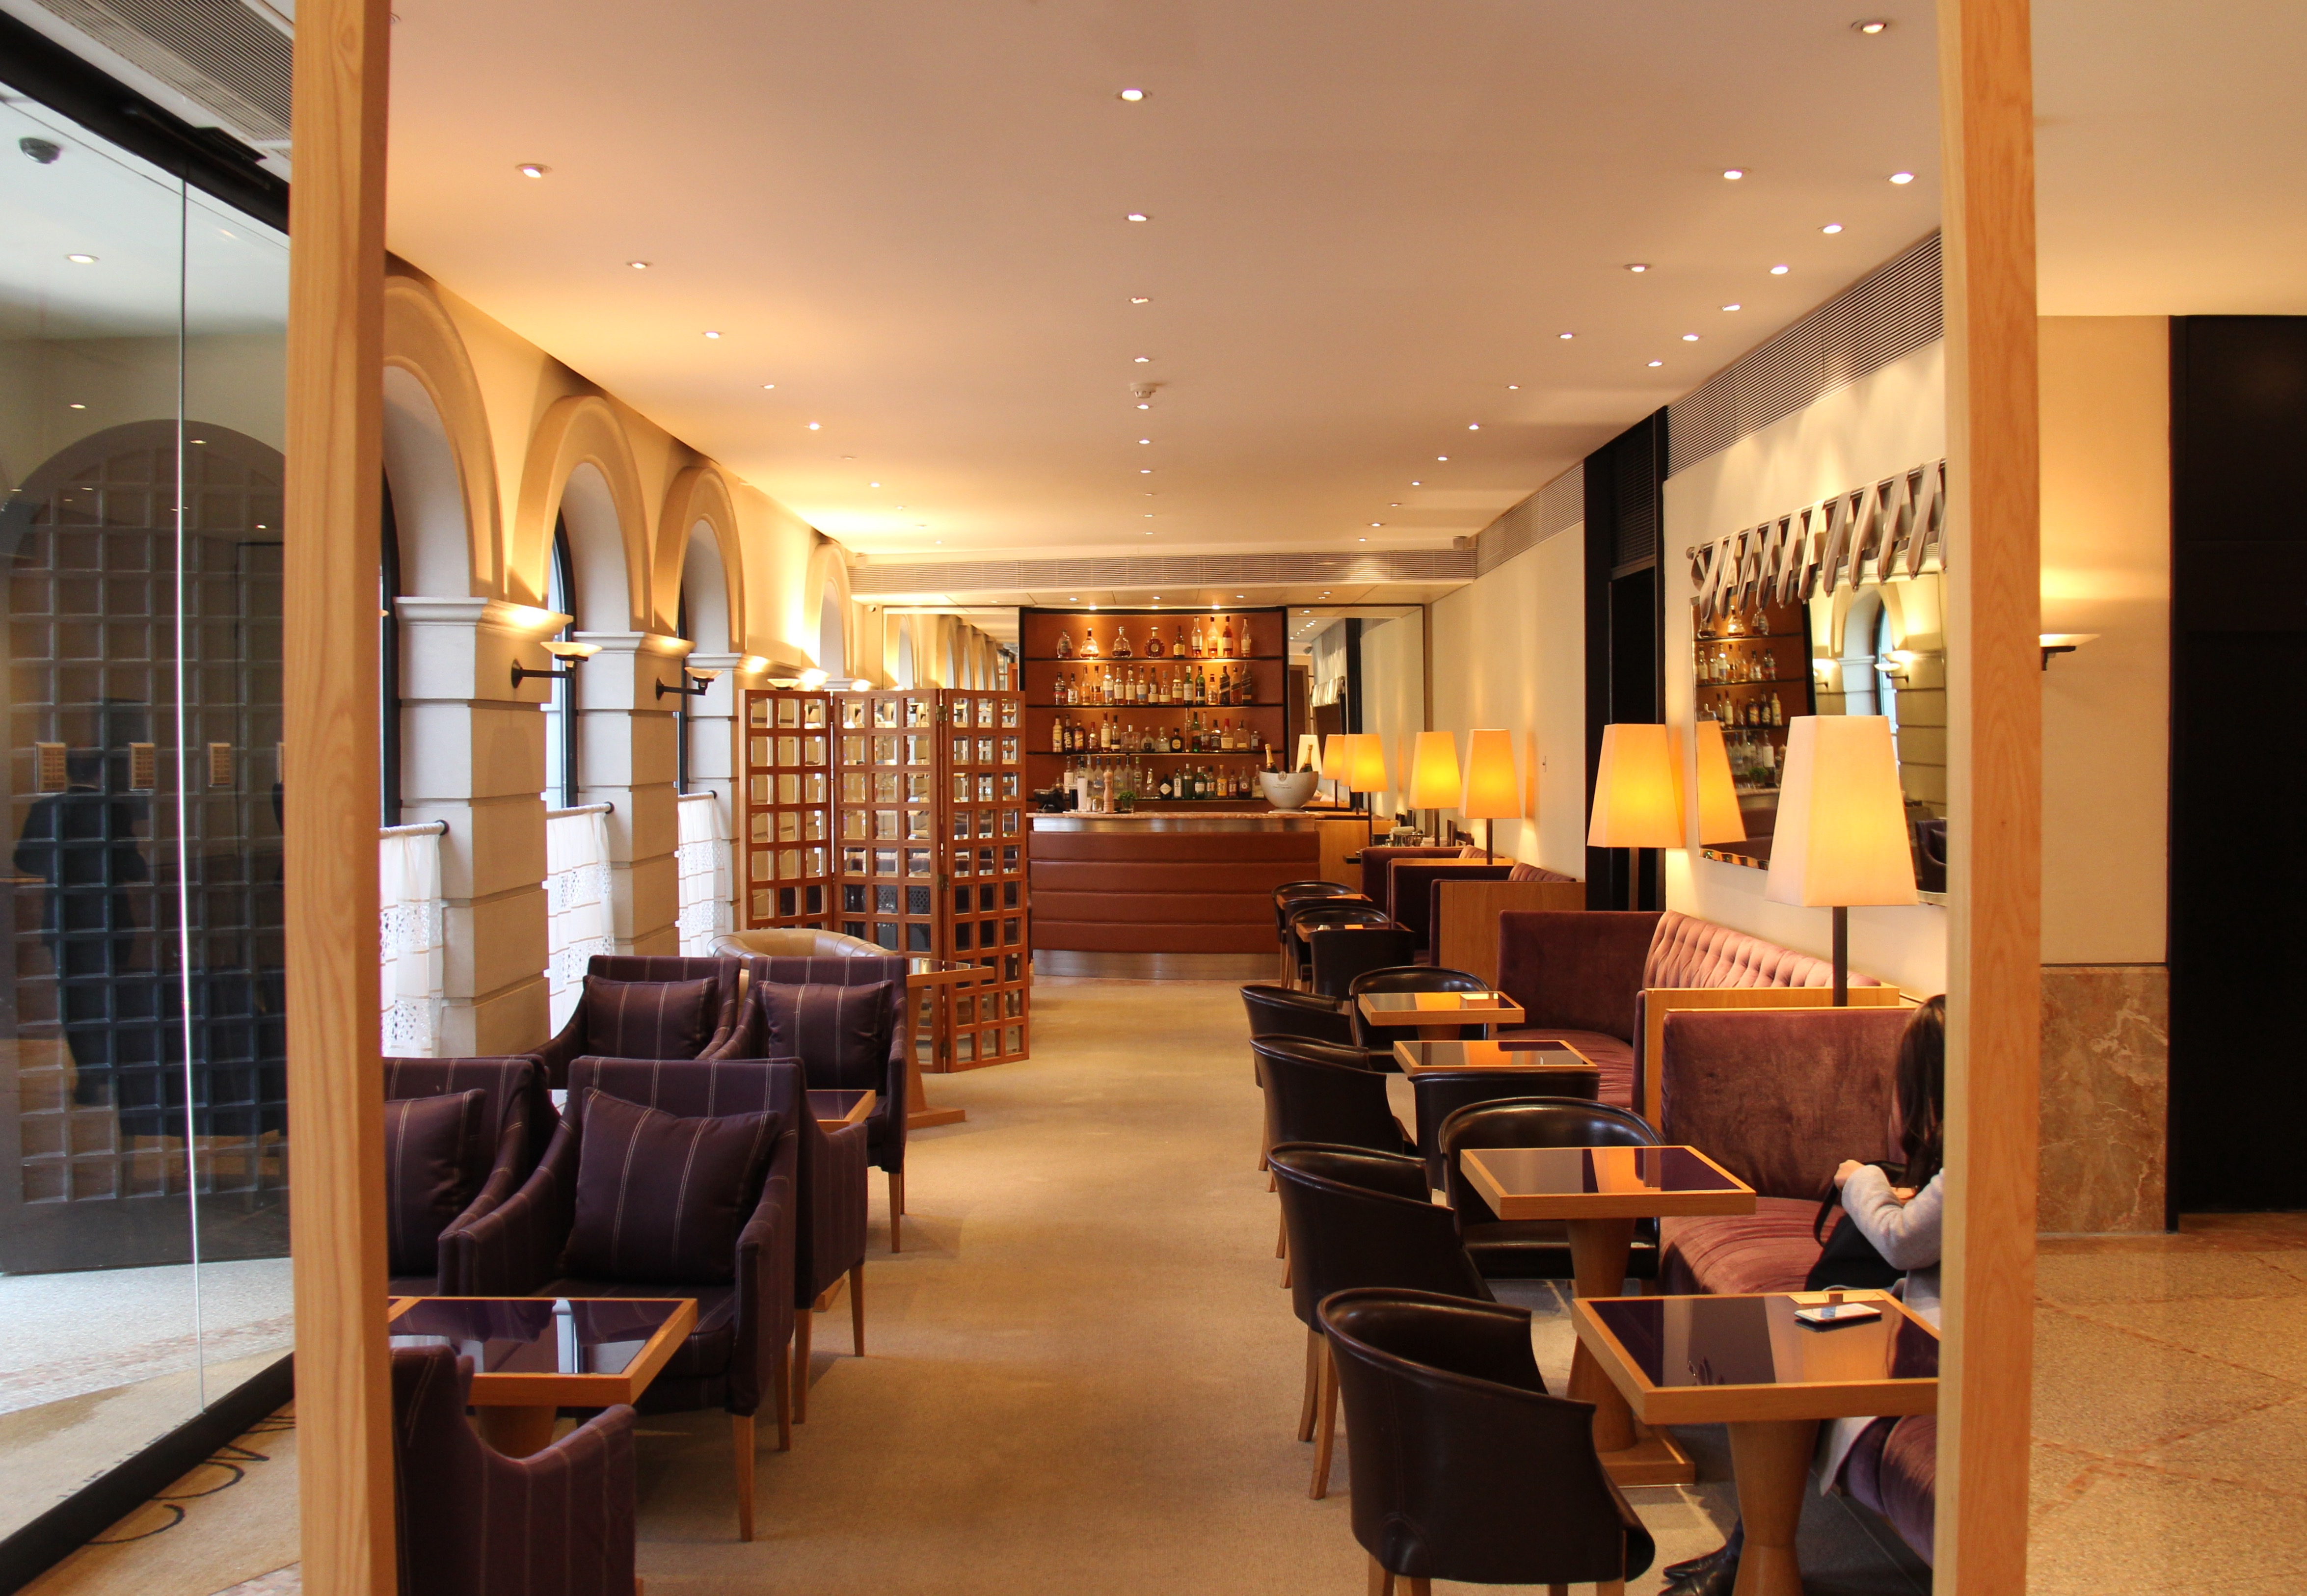 COMO The Halkin The bar/cafe on the first floor is the perfect place to spend an afternoon.